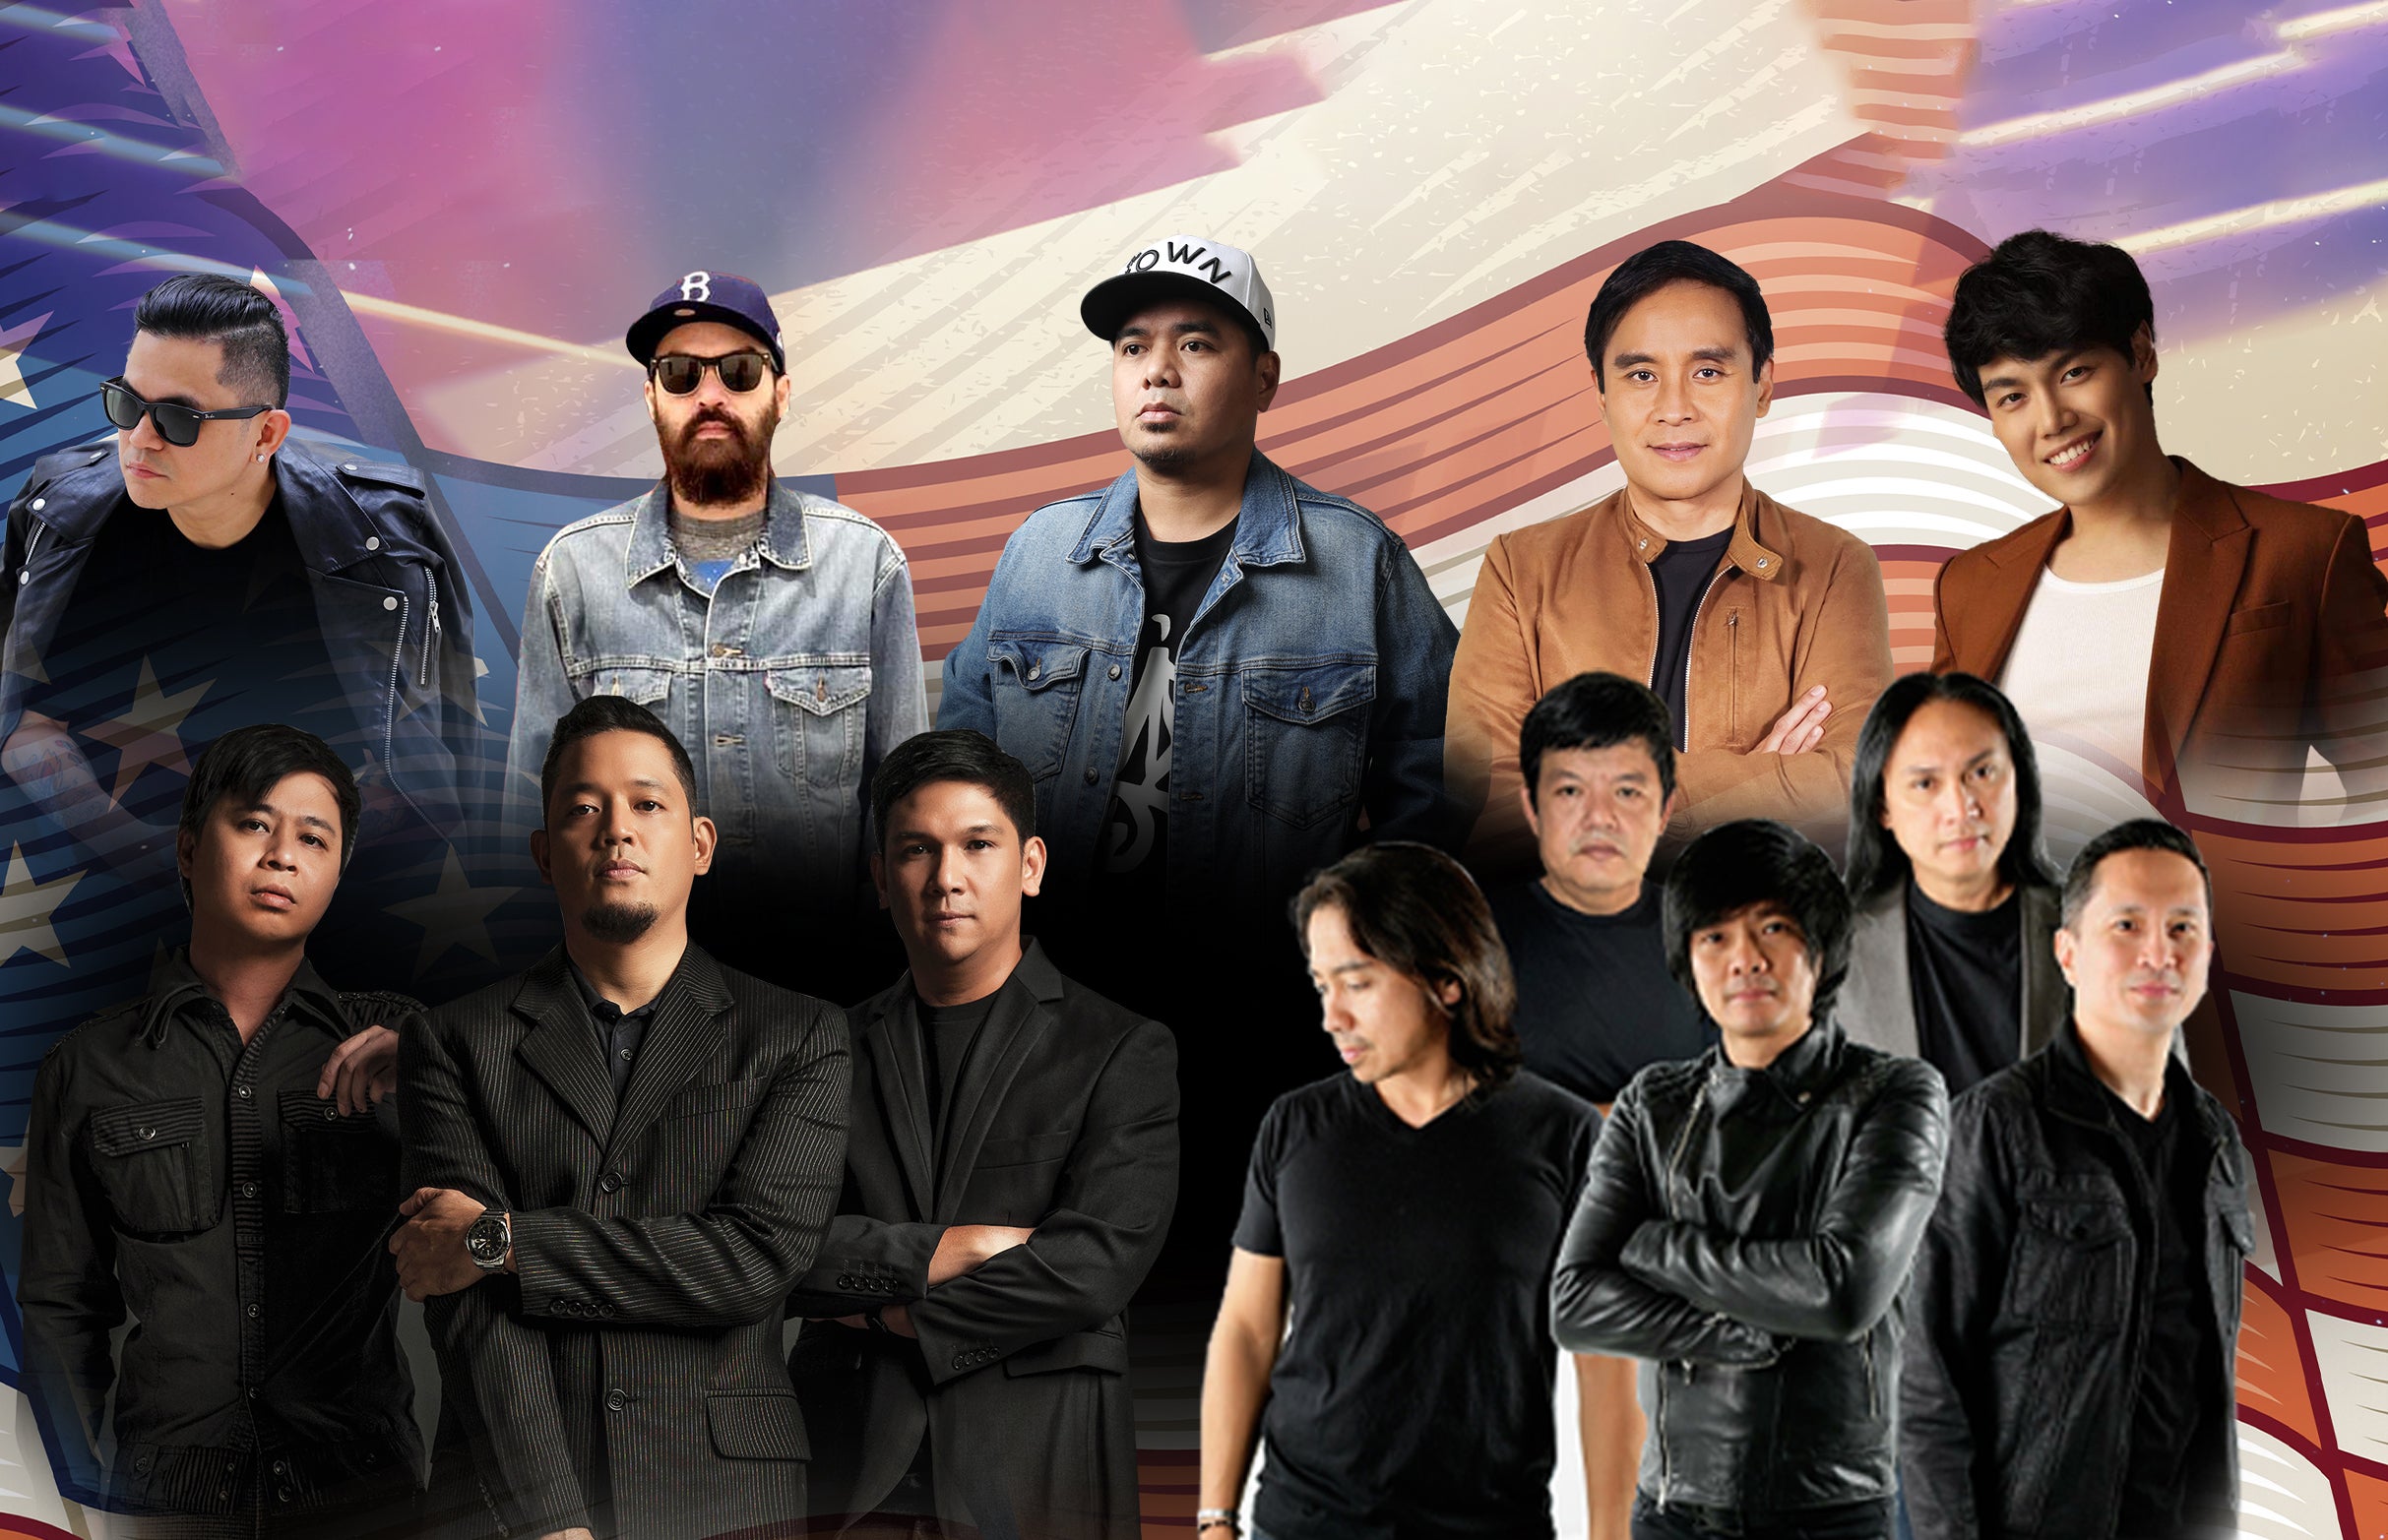 The Biggest Opm Summer Fest Part II